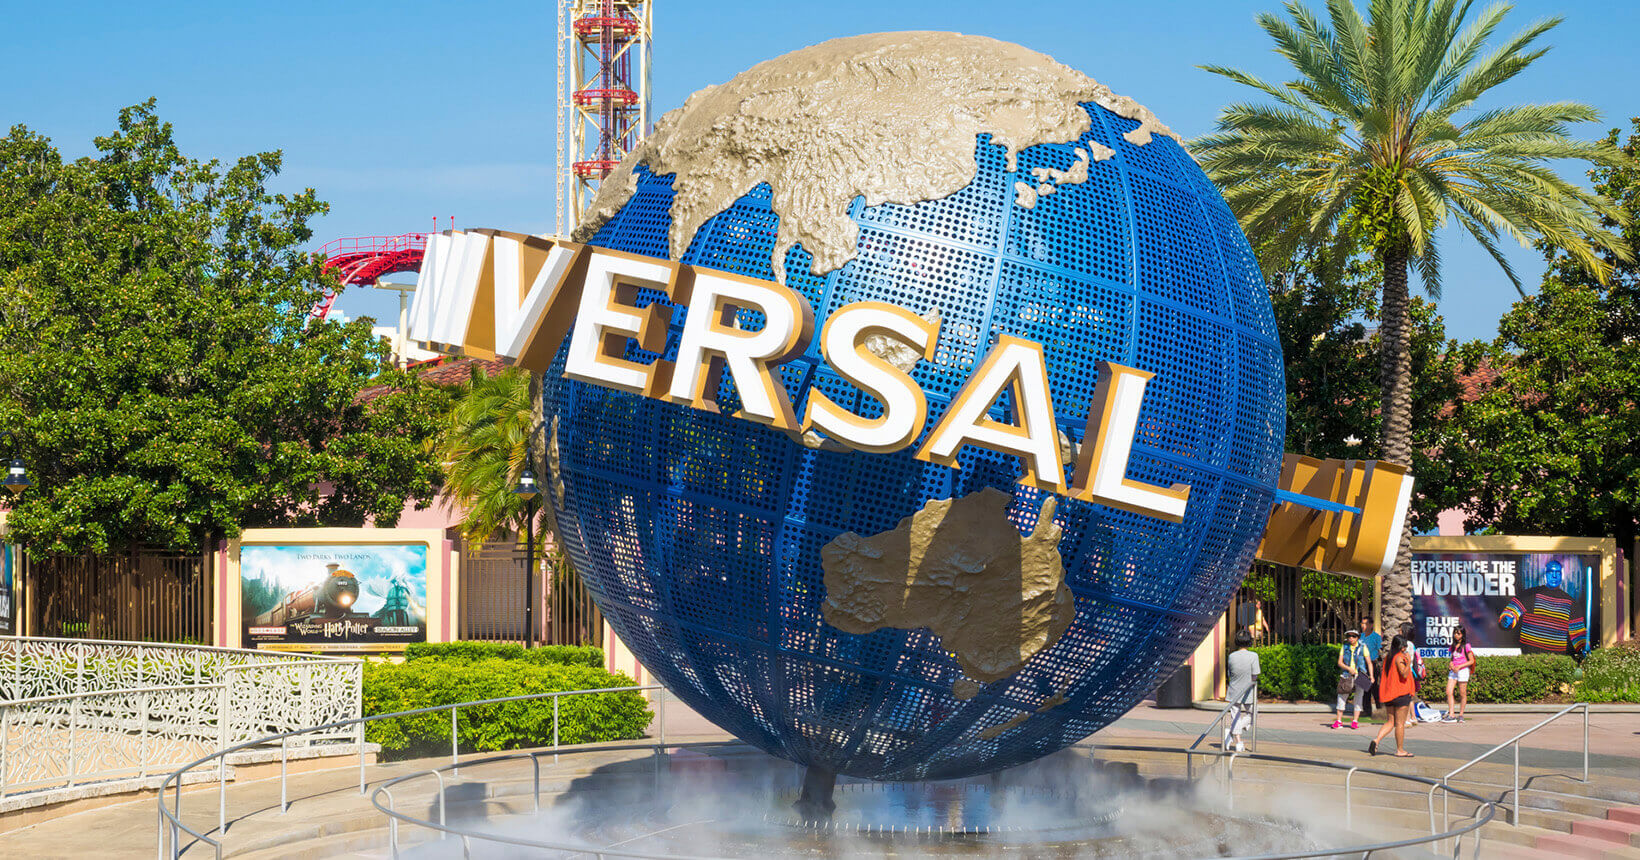 Universal offers 3 days of free admission to theme parks in Orlando